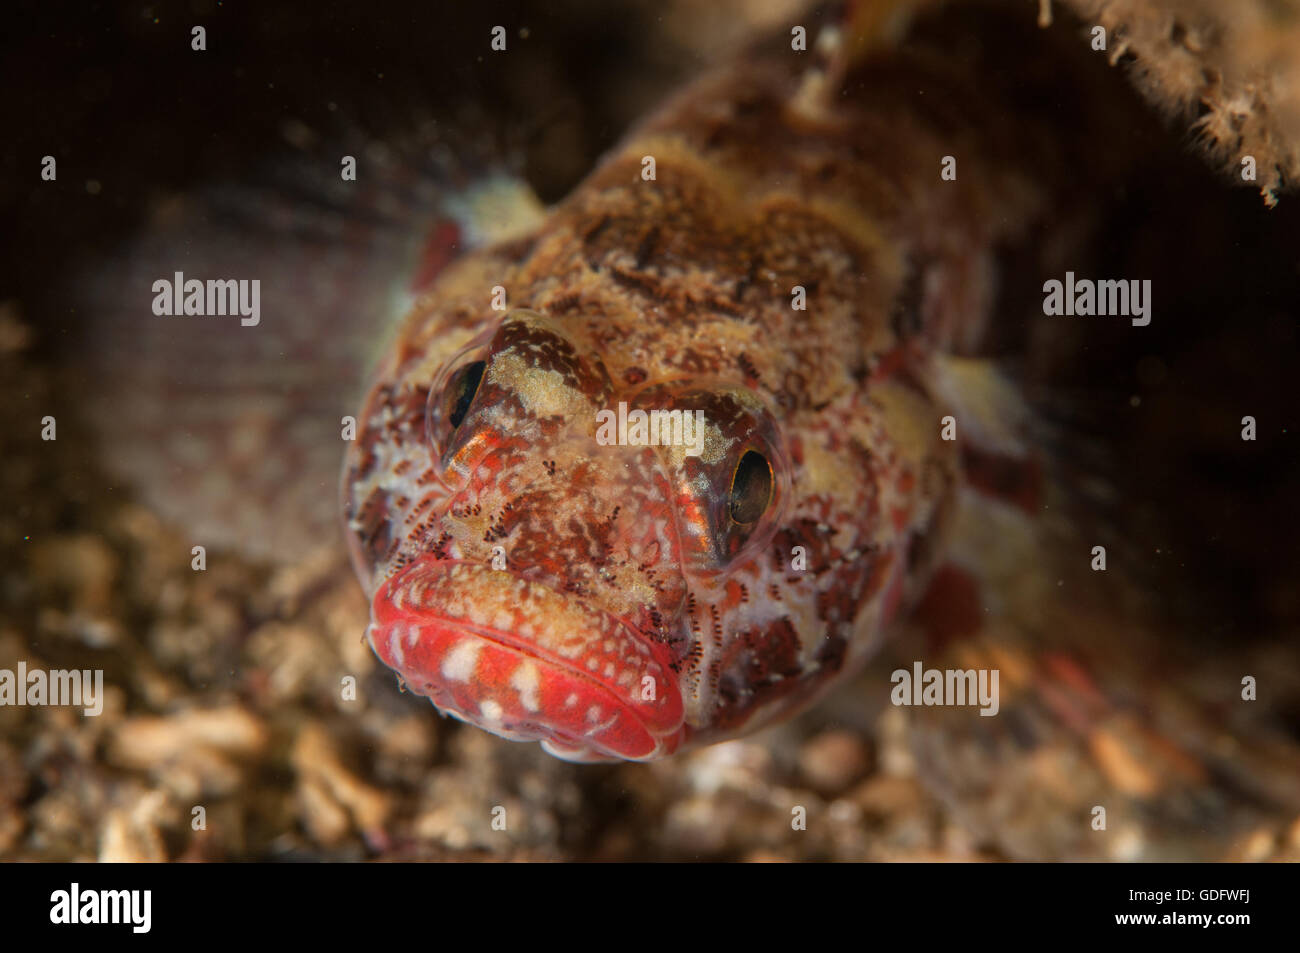 Red-mouthed goby in Mediterranean Sea, L'escala, Spain Stock Photo